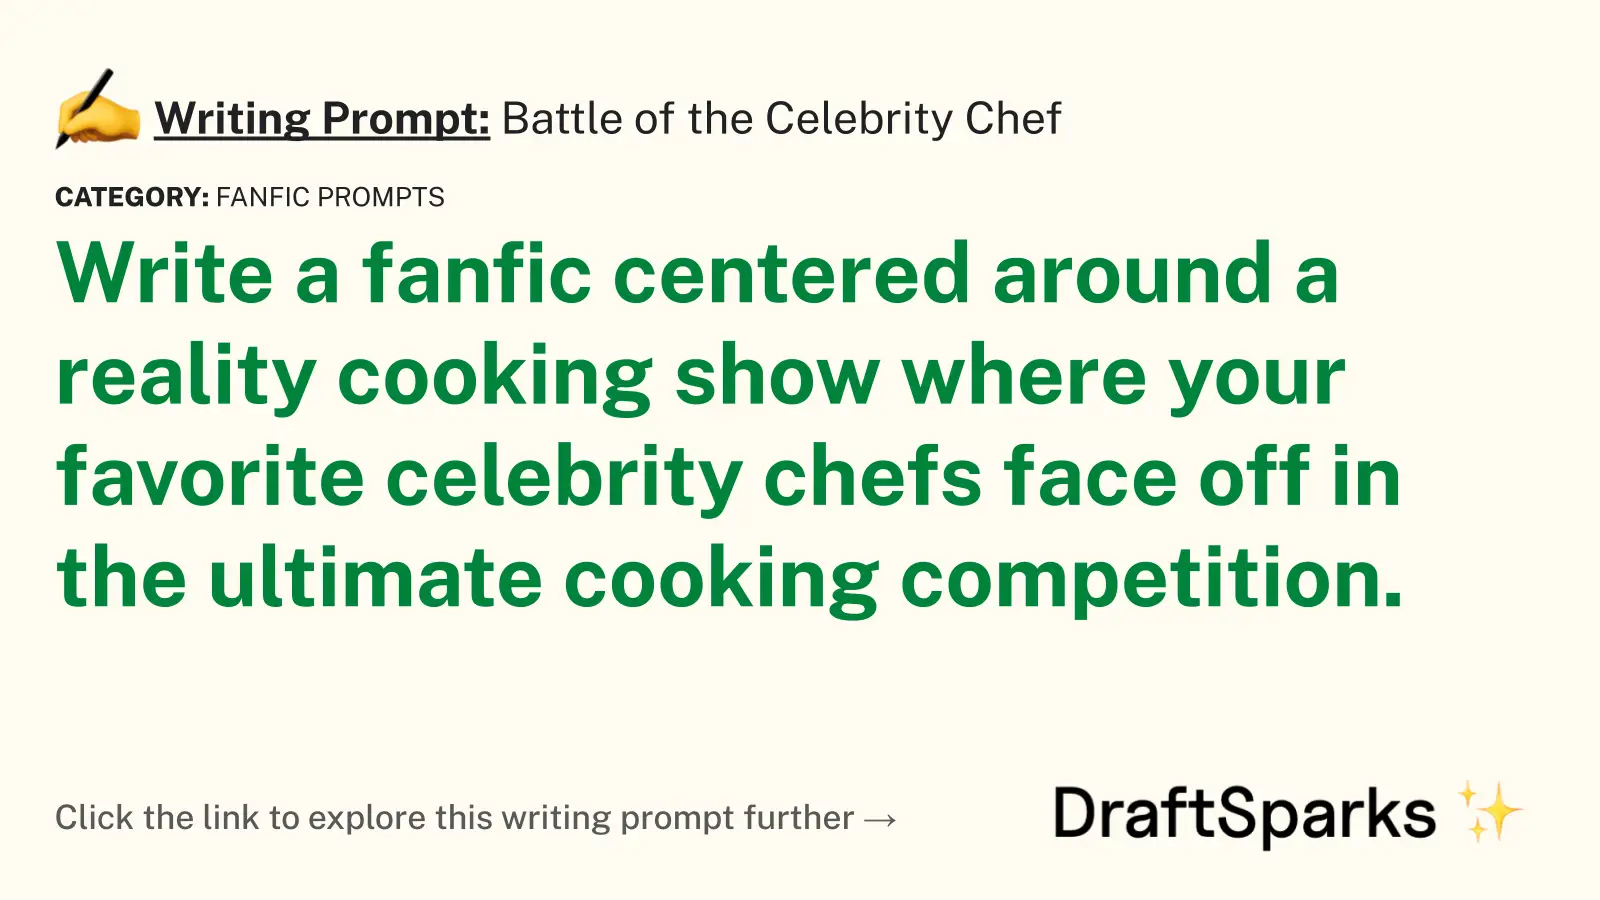 Battle of the Celebrity Chef